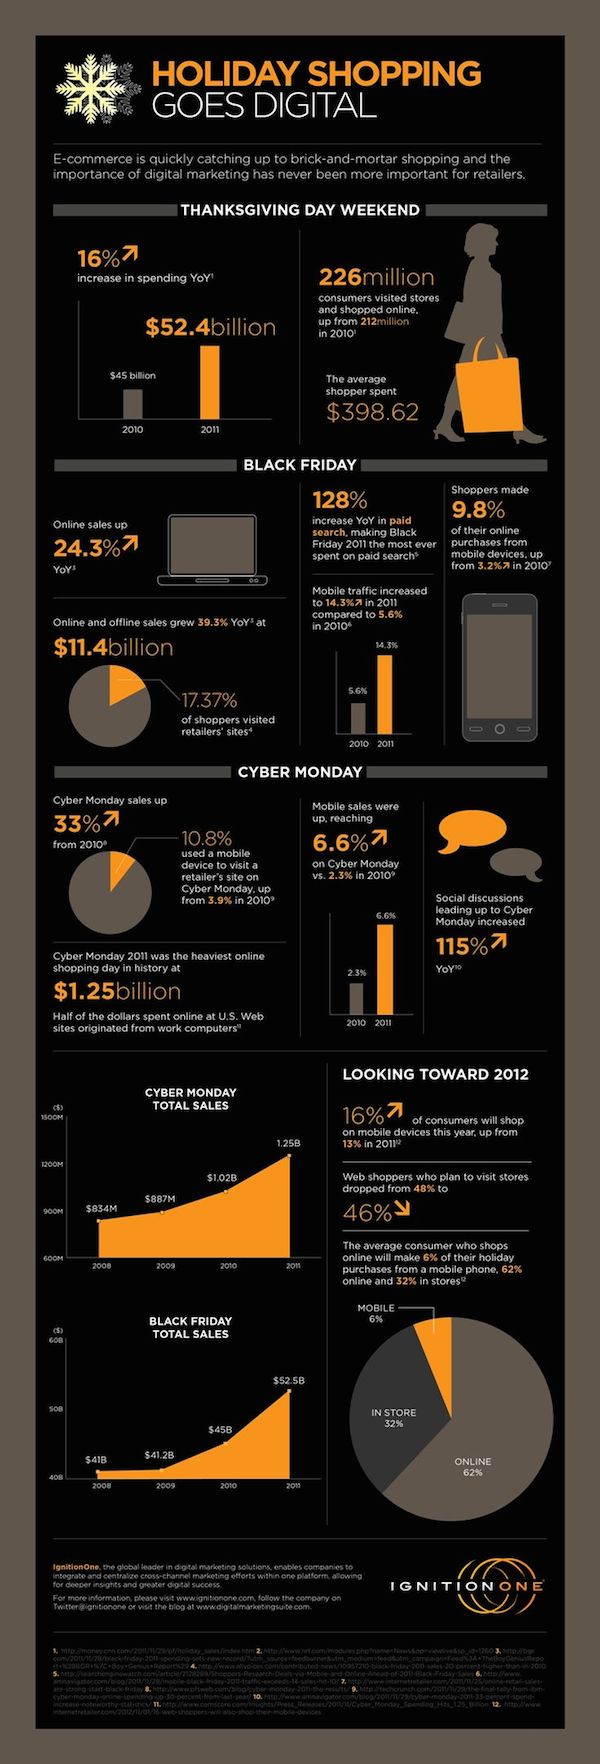 20 Black Friday And Cyber Monday Infographics image 91.jpg1